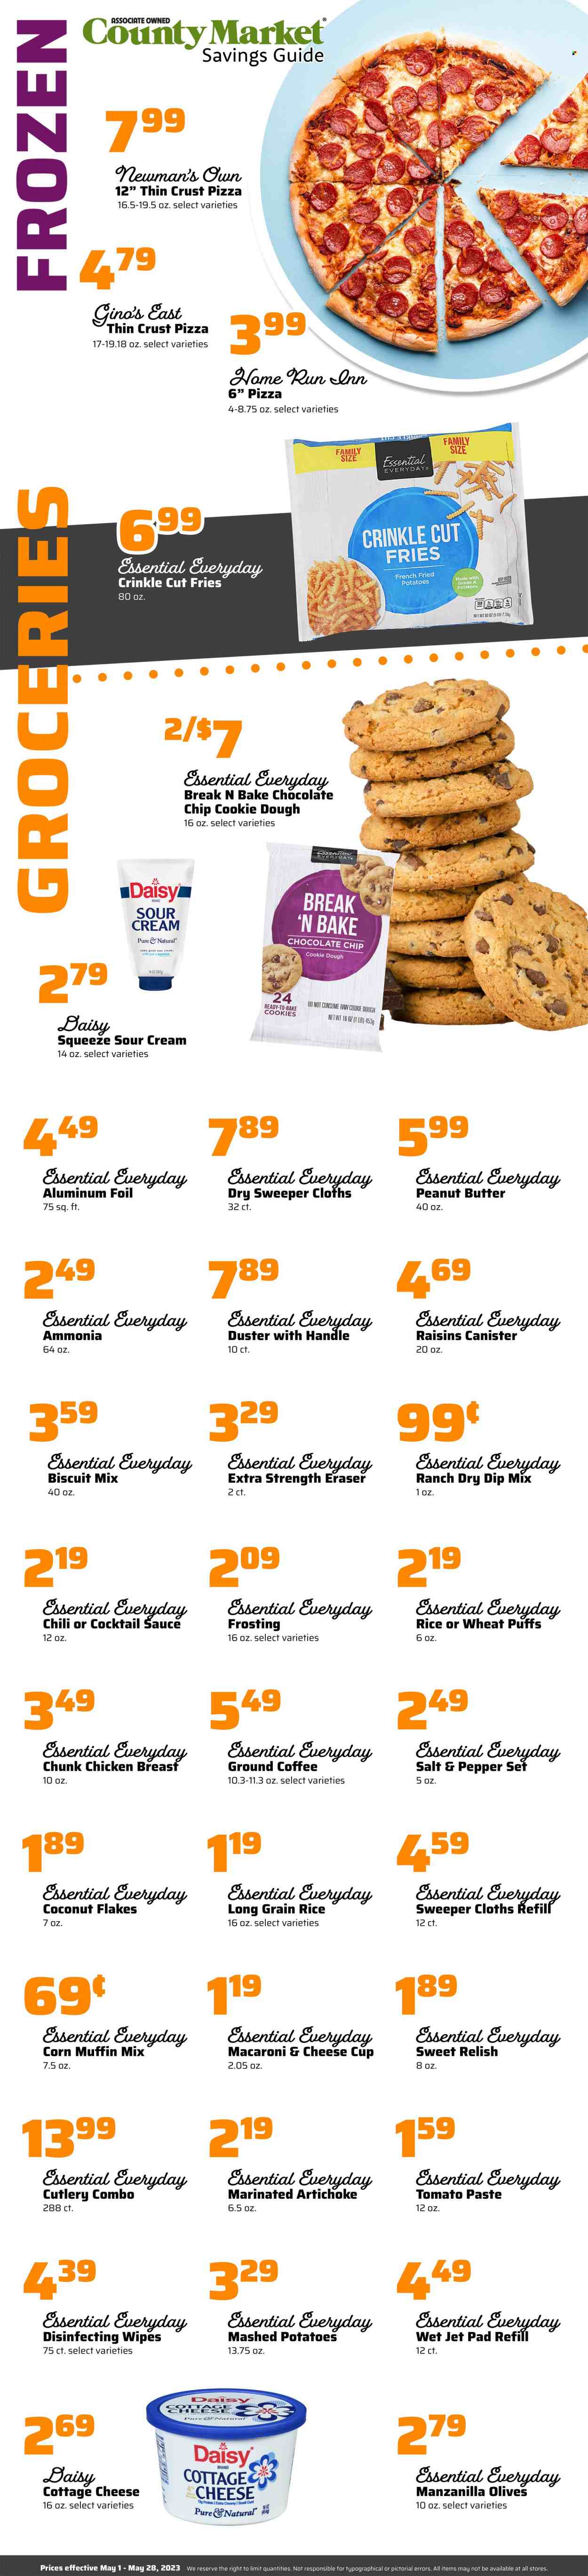 thumbnail - County Market Flyer - 05/01/2023 - 05/28/2023 - Sales products - puffs, muffin, muffin mix, artichoke, corn, macaroni & cheese, mashed potatoes, pizza, sauce, cottage cheese, cheese cup, sour cream, dip, potato fries, cookie dough, cookies, chocolate chips, biscuit, frosting, corn muffin, tomato paste, olives, long grain rice, cocktail sauce, peanut butter, flaked coconut, raisins, dried fruit, coffee, ground coffee, chicken breasts, chicken. Page 1.